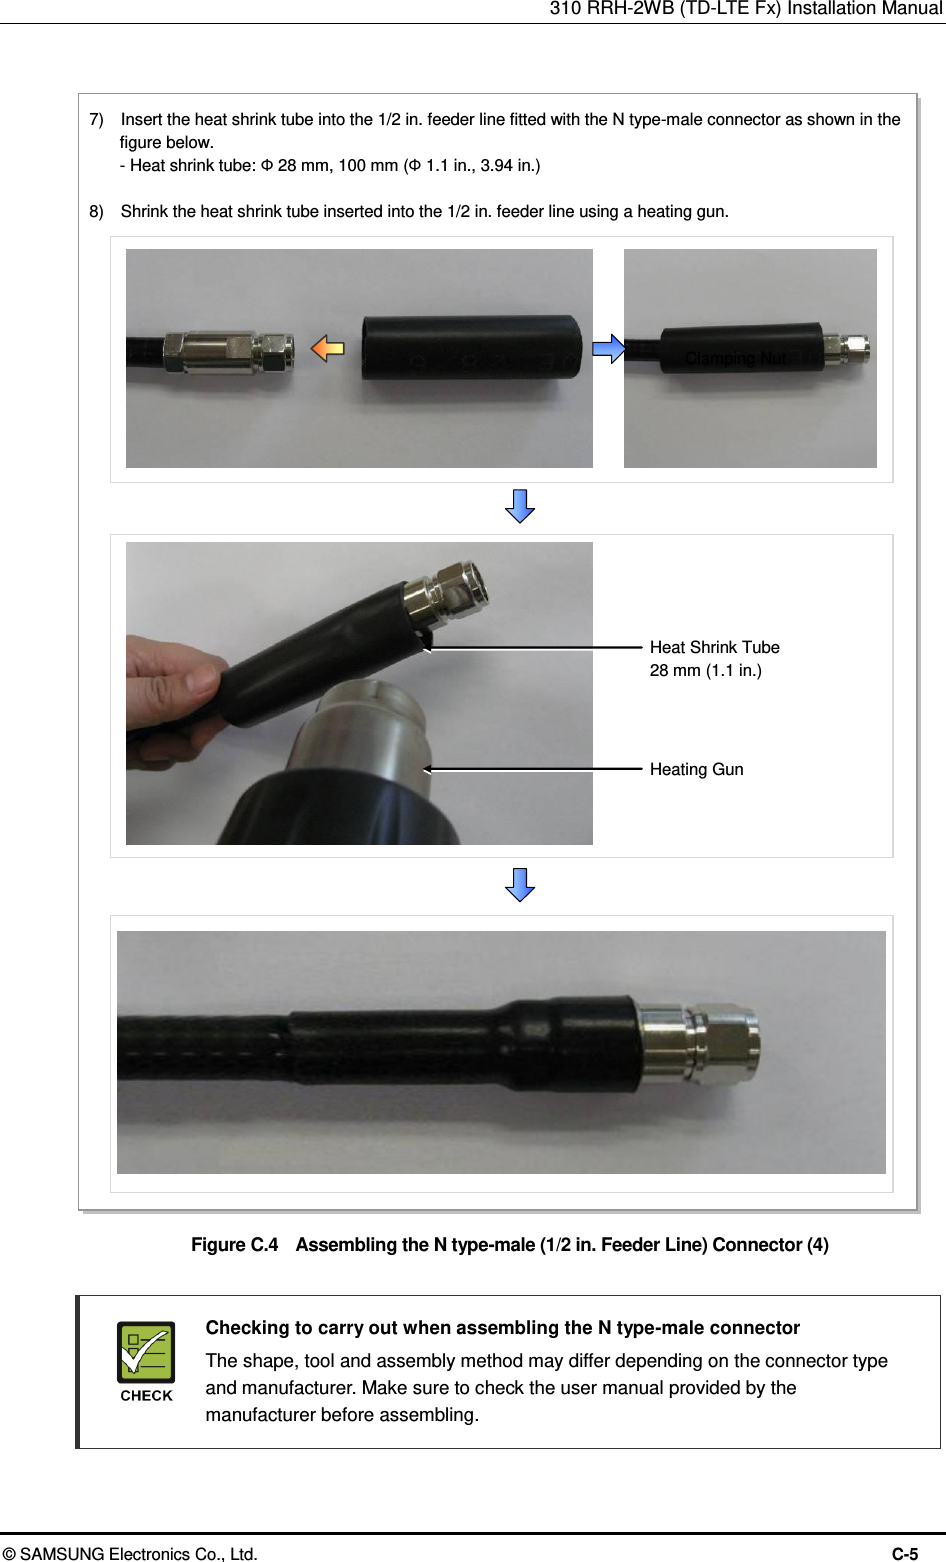 310 RRH-2WB (TD-LTE Fx) Installation Manual  © SAMSUNG Electronics Co., Ltd.  C-5  Figure C.4    Assembling the N type-male (1/2 in. Feeder Line) Connector (4)    Checking to carry out when assembling the N type-male connector   The shape, tool and assembly method may differ depending on the connector type and manufacturer. Make sure to check the user manual provided by the manufacturer before assembling.  Clamping Nut 7)    Insert the heat shrink tube into the 1/2 in. feeder line fitted with the N type-male connector as shown in the figure below.   - Heat shrink tube: Ф 28 mm, 100 mm (Ф 1.1 in., 3.94 in.)  8)    Shrink the heat shrink tube inserted into the 1/2 in. feeder line using a heating gun. Heating Gun Heat Shrink Tube 28 mm (1.1 in.)  